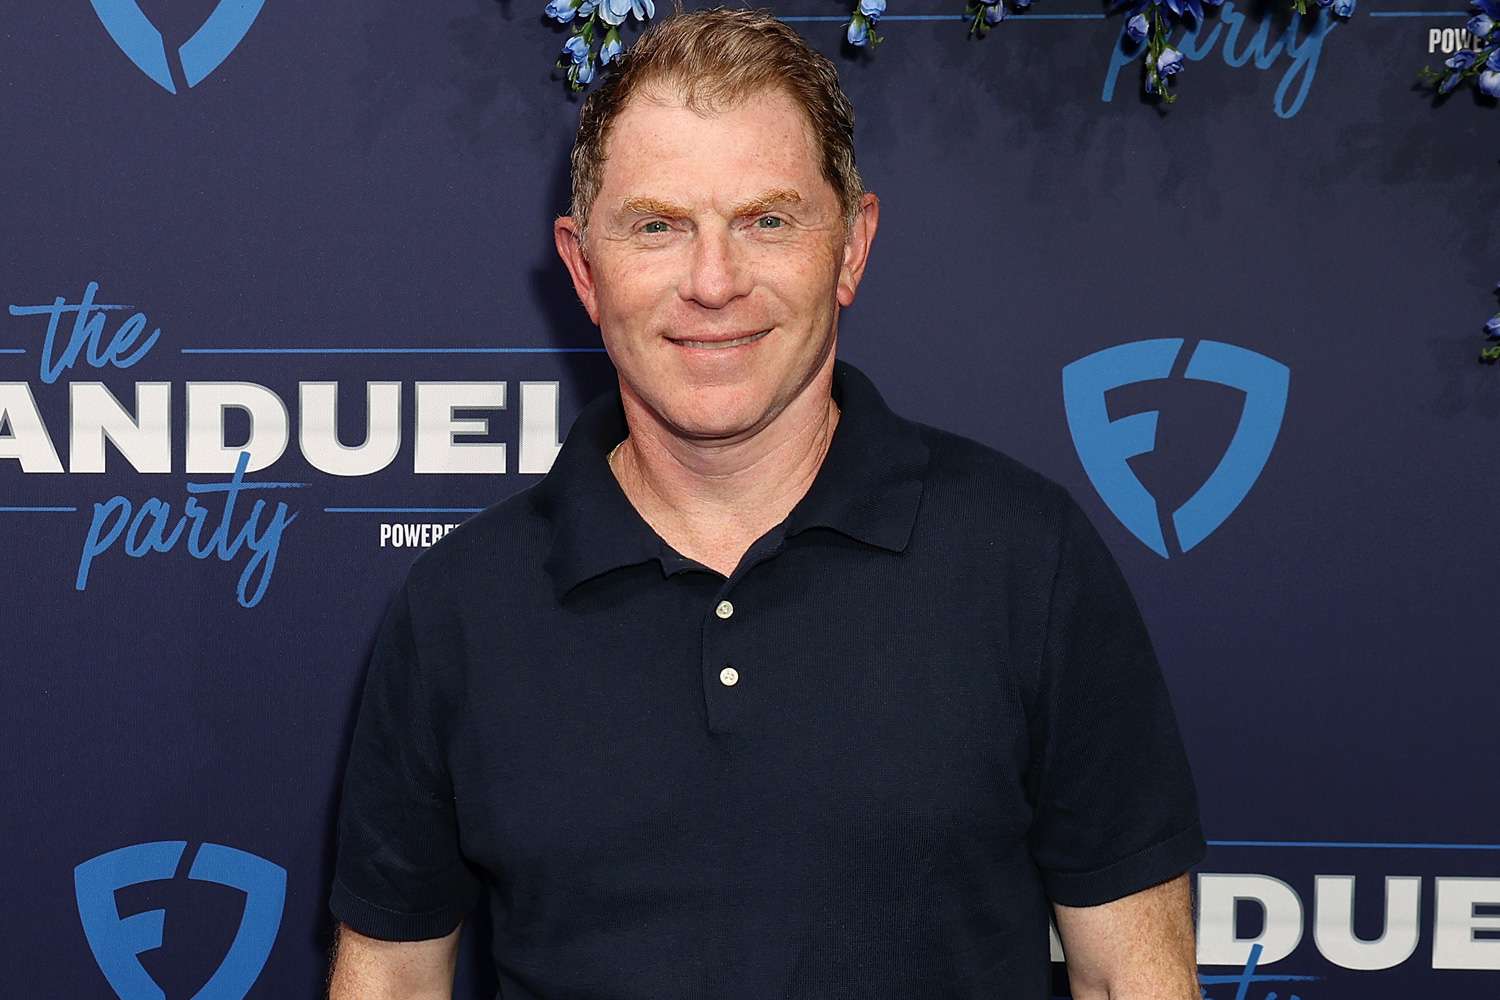 Bobby Flay Says He's 'Relaxed' on Dating After His Recent Breakup: 'Still Kind of New' (Exclusive)